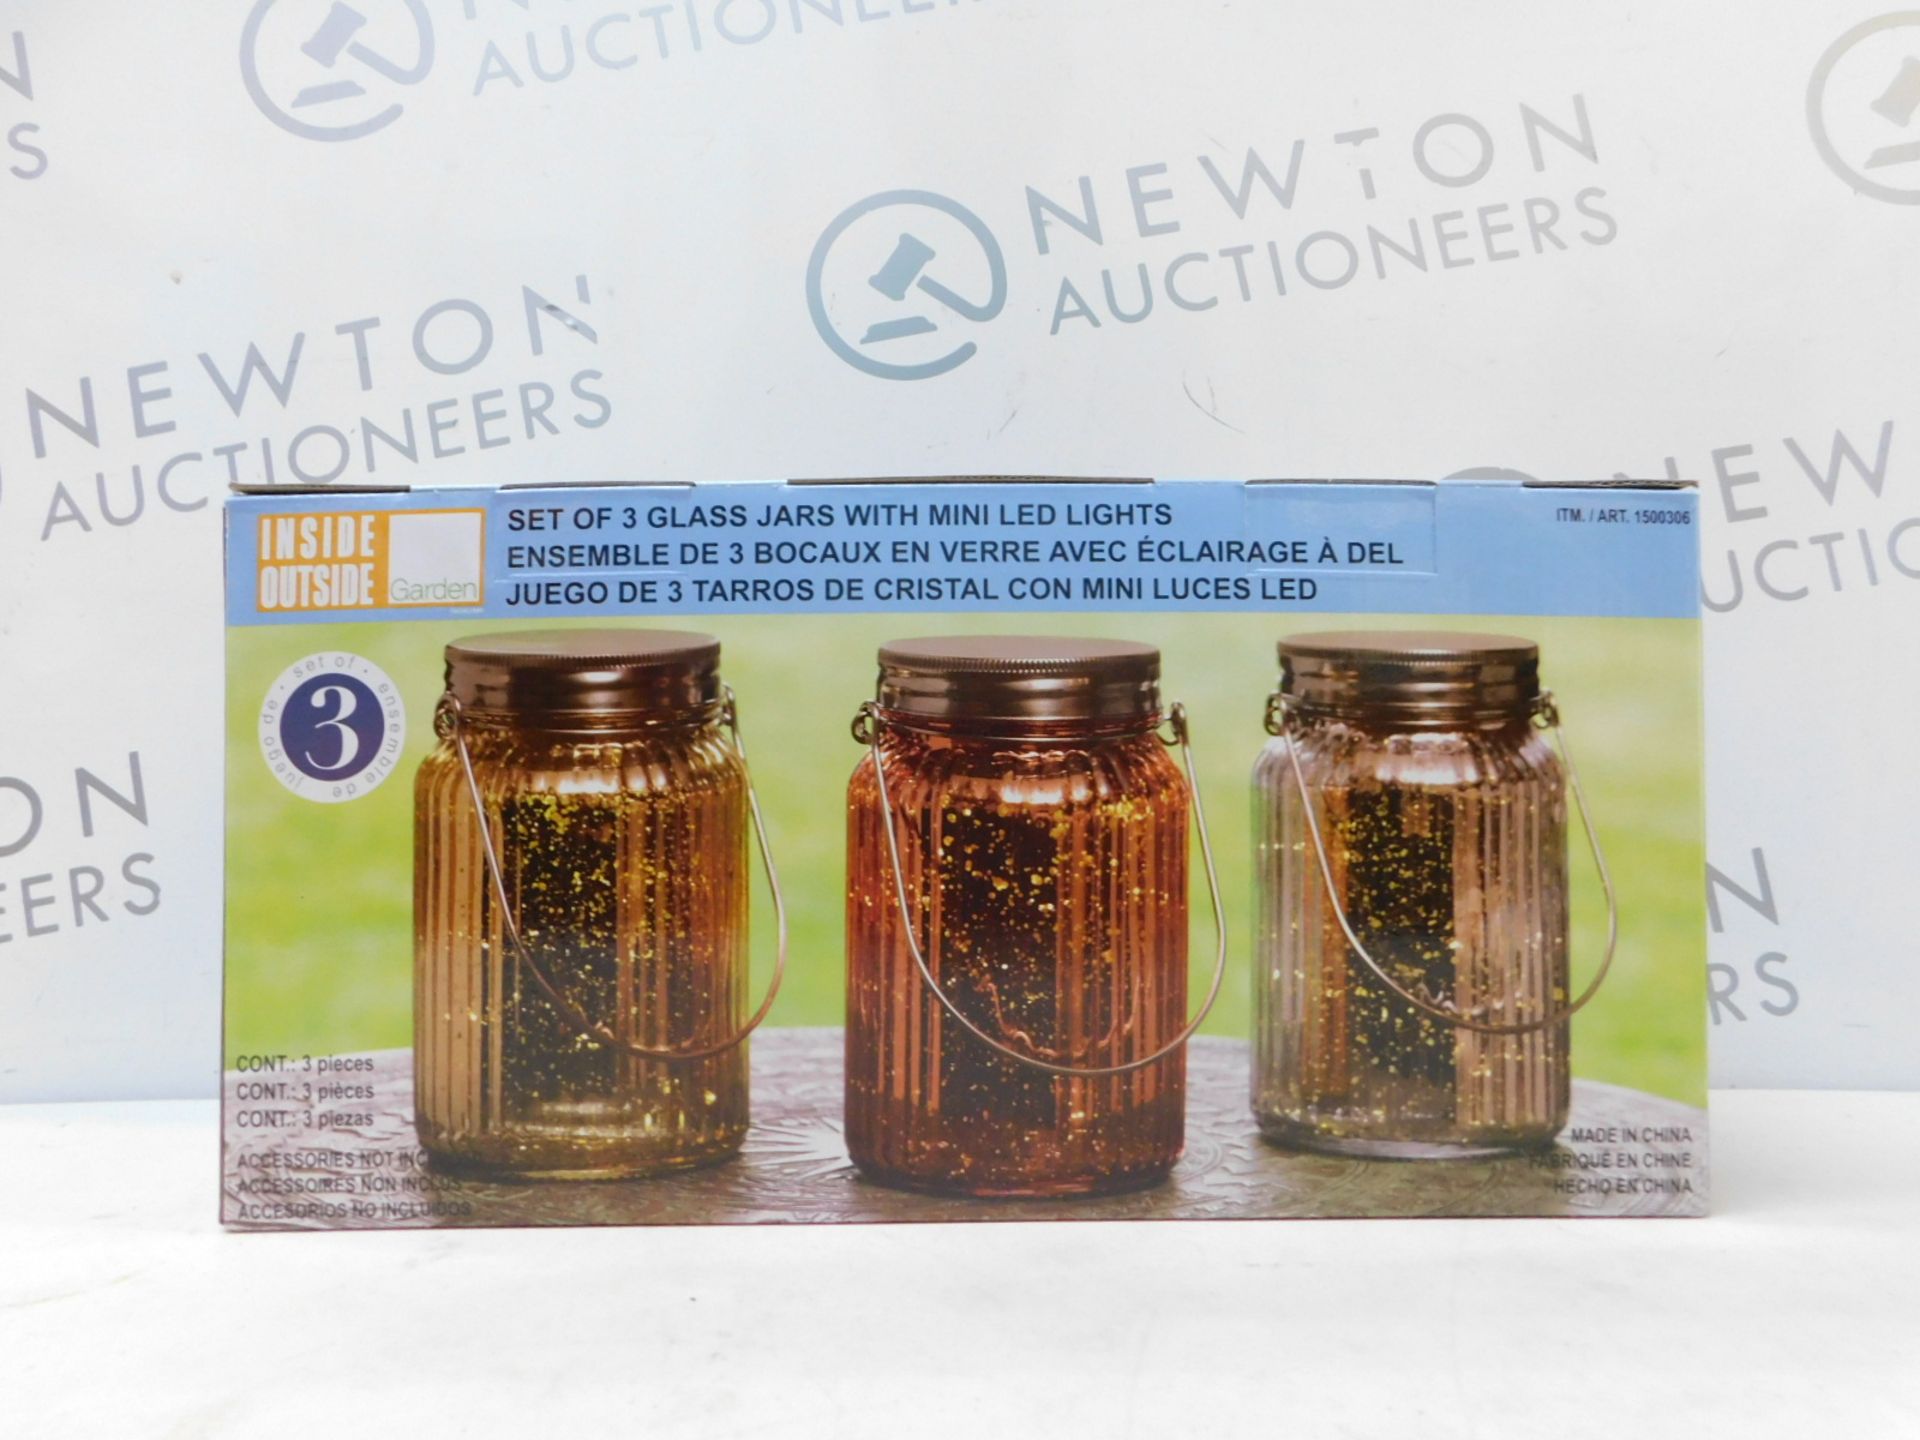 1 BOXED SET OF 3 COLORED GLASS GARDEN JARS WITH FAIRY LIGHTS RRP Â£39.99